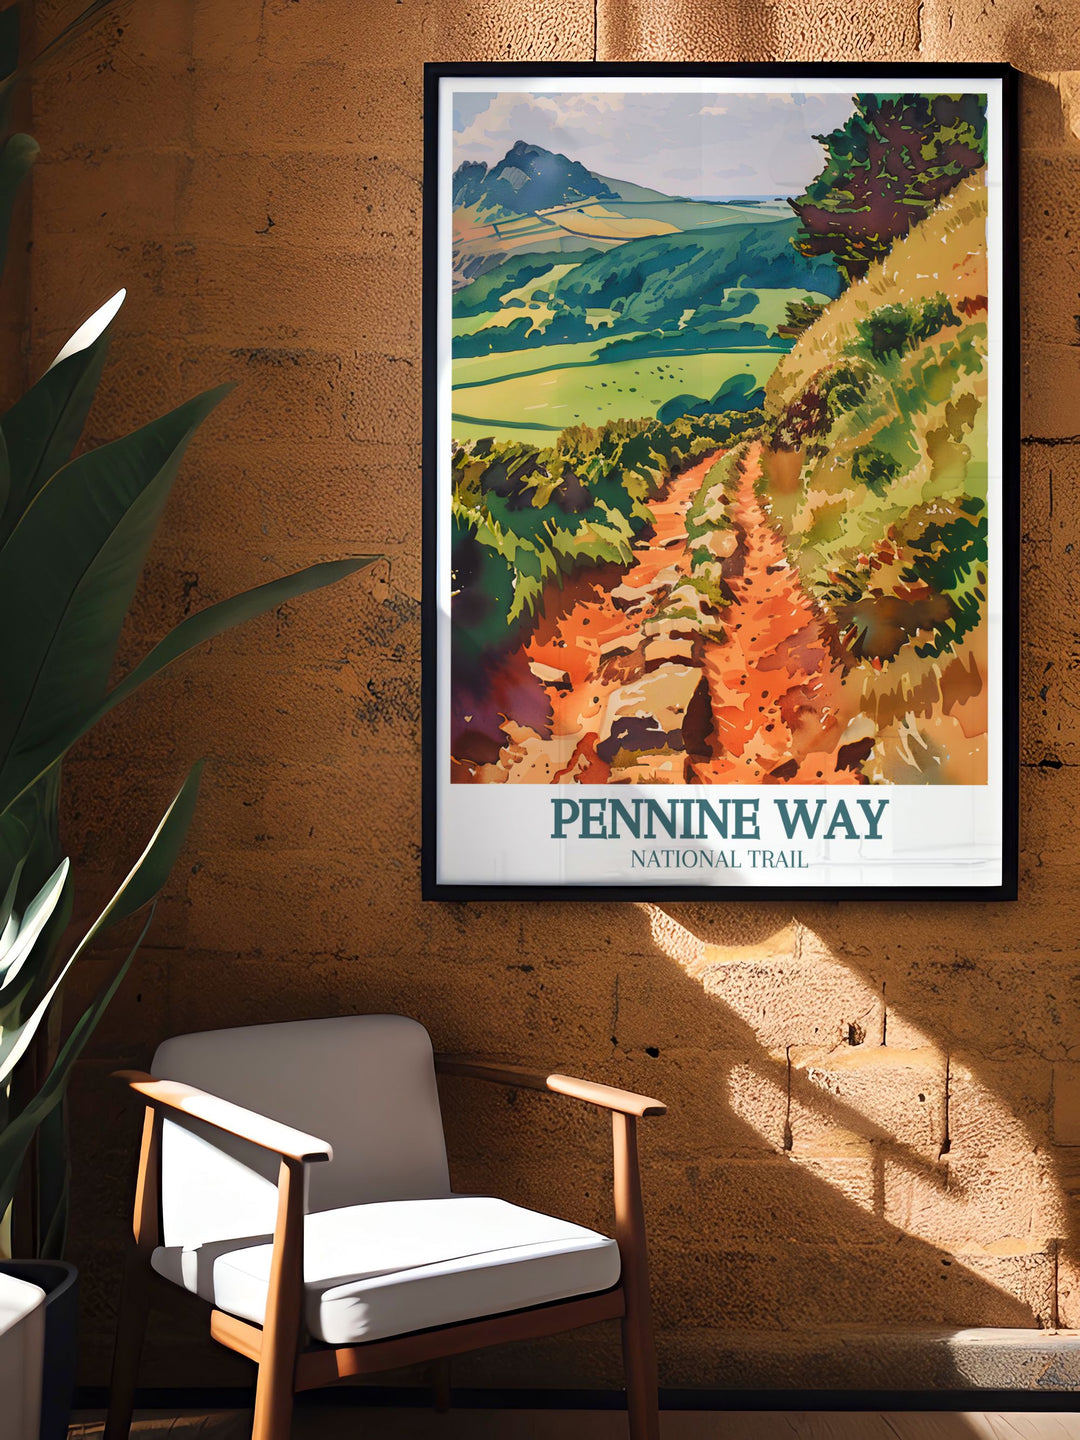 Pennine Way Print capturing the essence of the famous national trail across the Pennines an excellent gift for hiking enthusiasts and those who cherish outdoor adventures